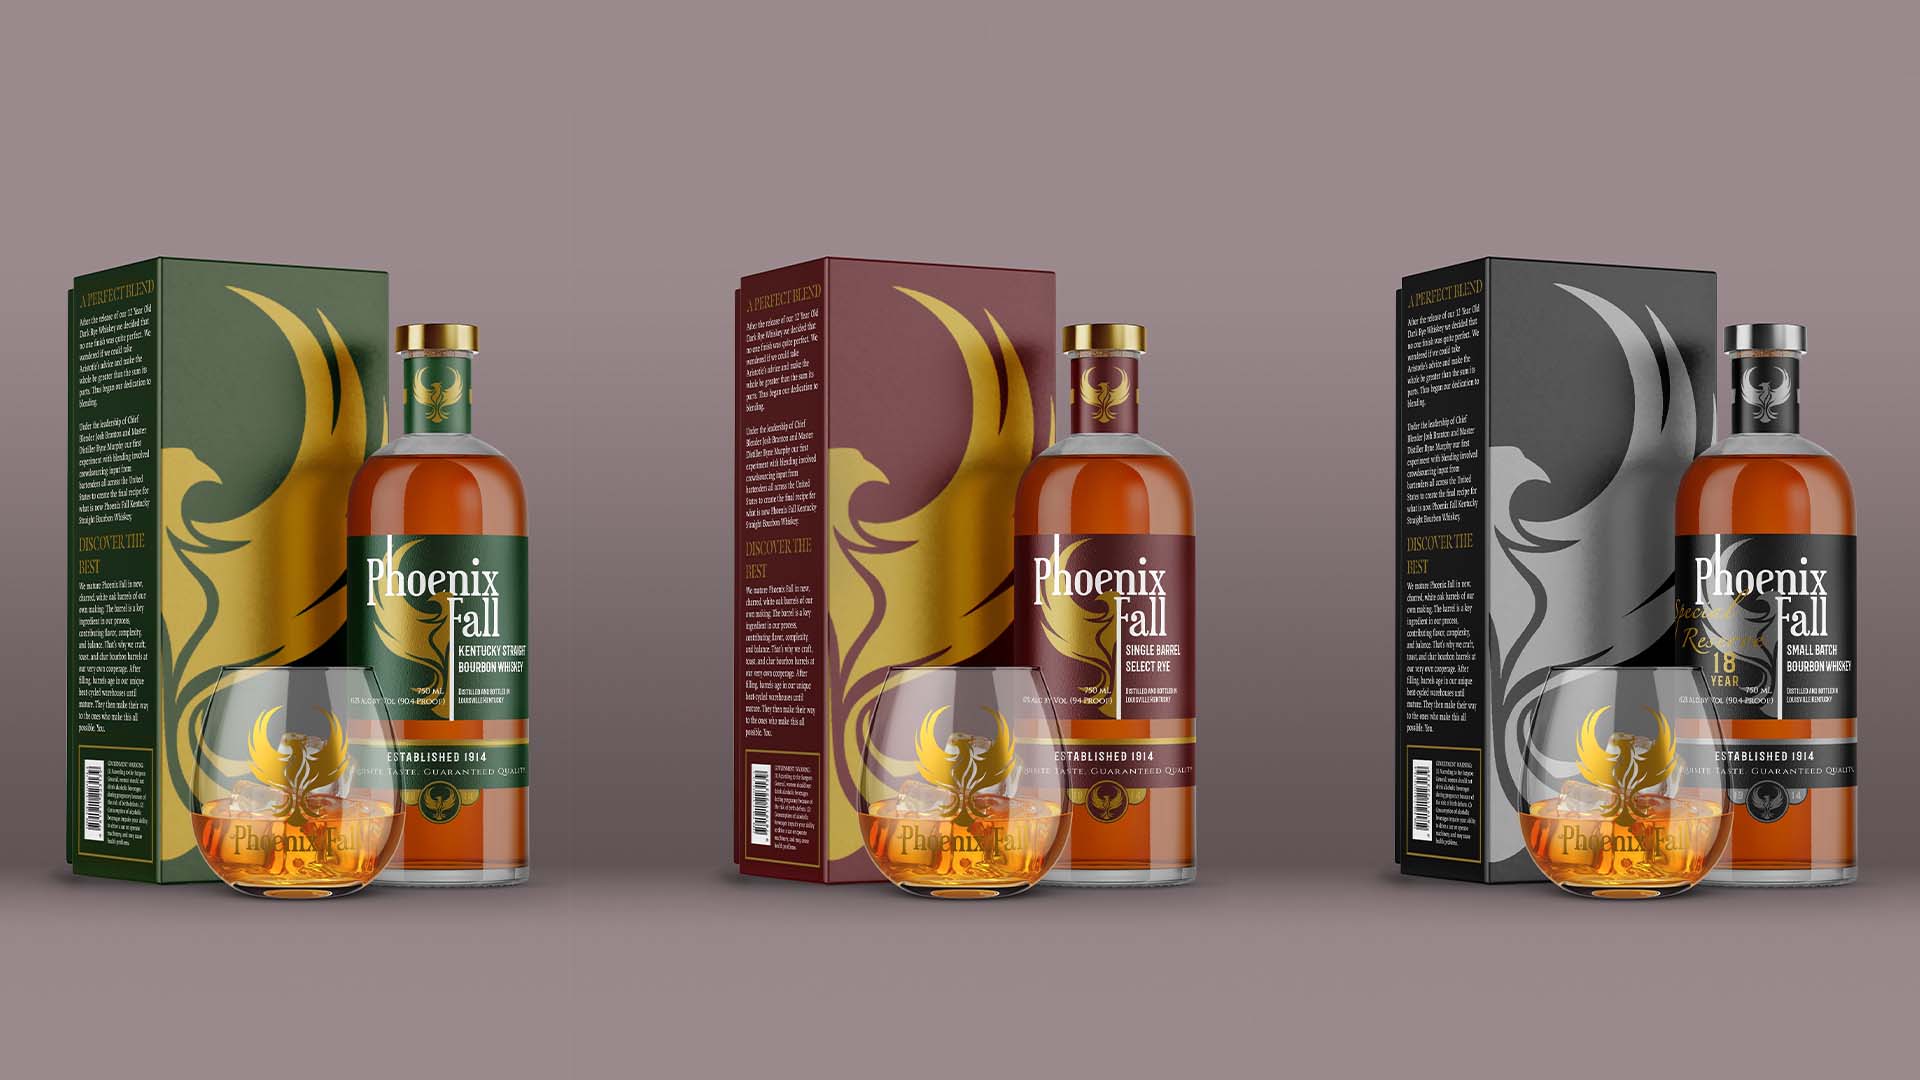  / “Phoenix Fall Bourbon” Bourbon Bottle and Box Packaging Design, Label: 4.5”x10” print on adhesive vinyl. Box: 4.5”x4.5”x11” print on paperboard, 2021. This packaging design displays the selection of liquors offered by Phoenix Fall."